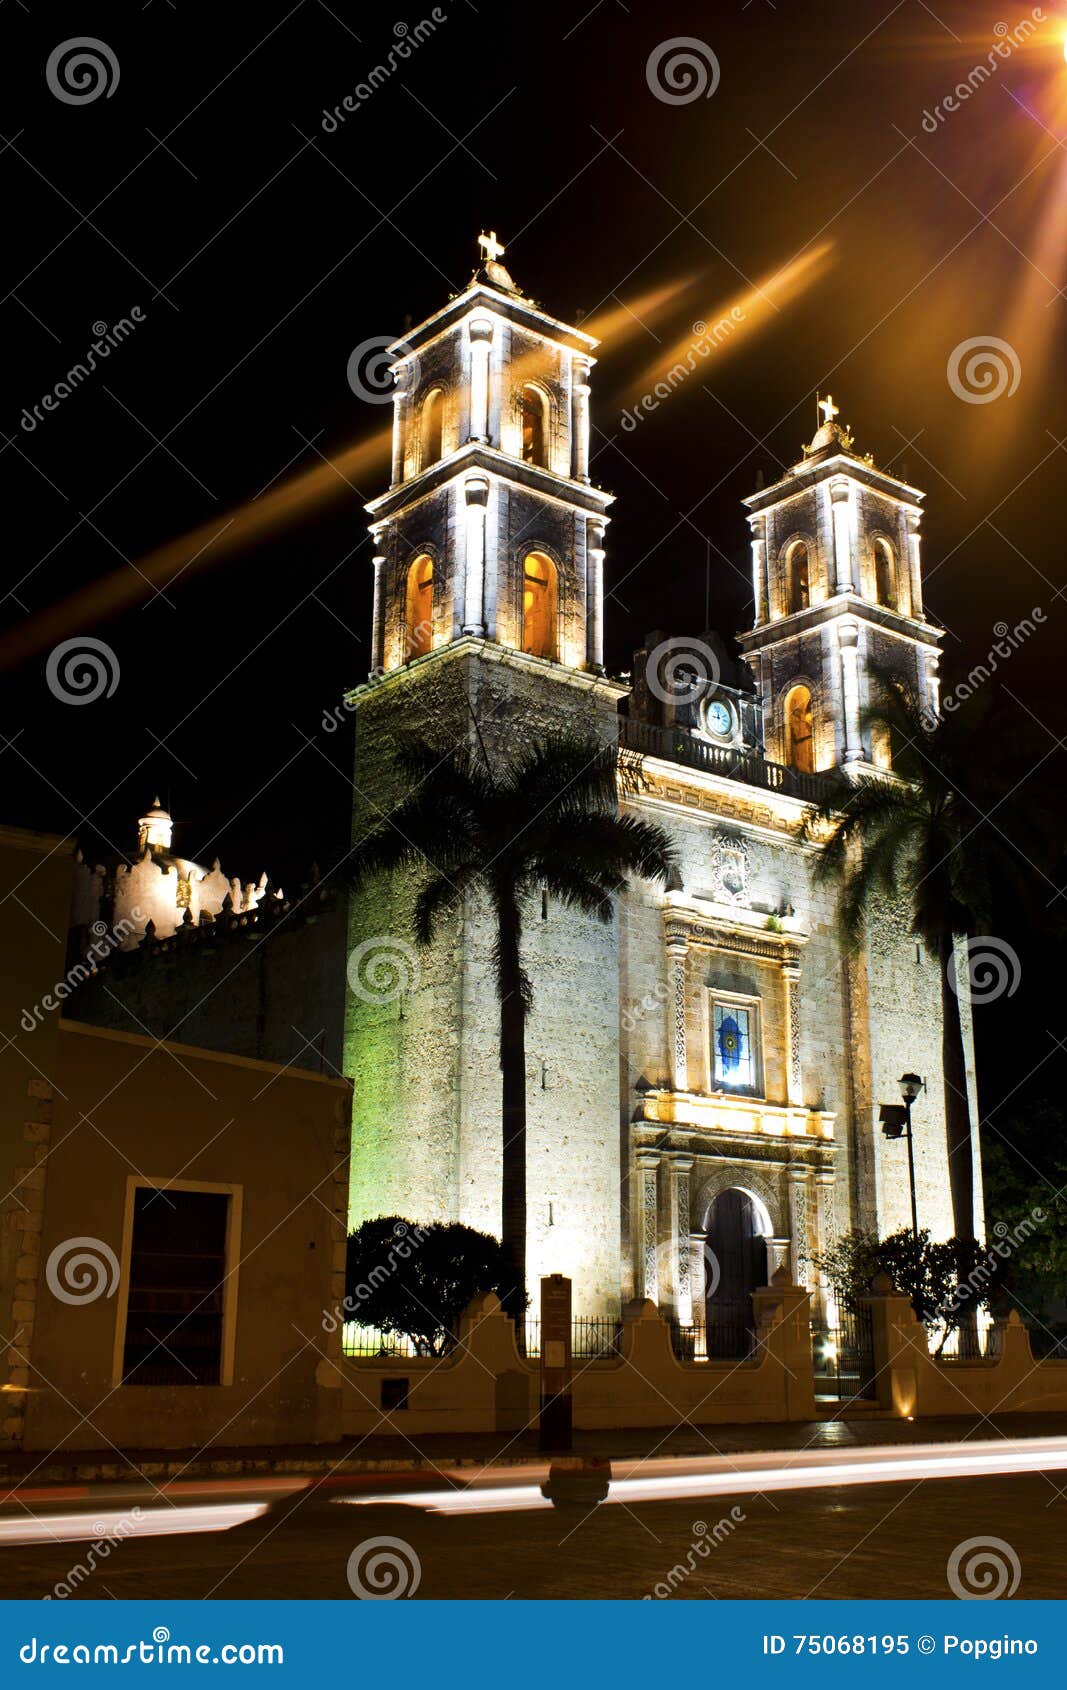 cathedral of san gervasio in valladolid, mexico